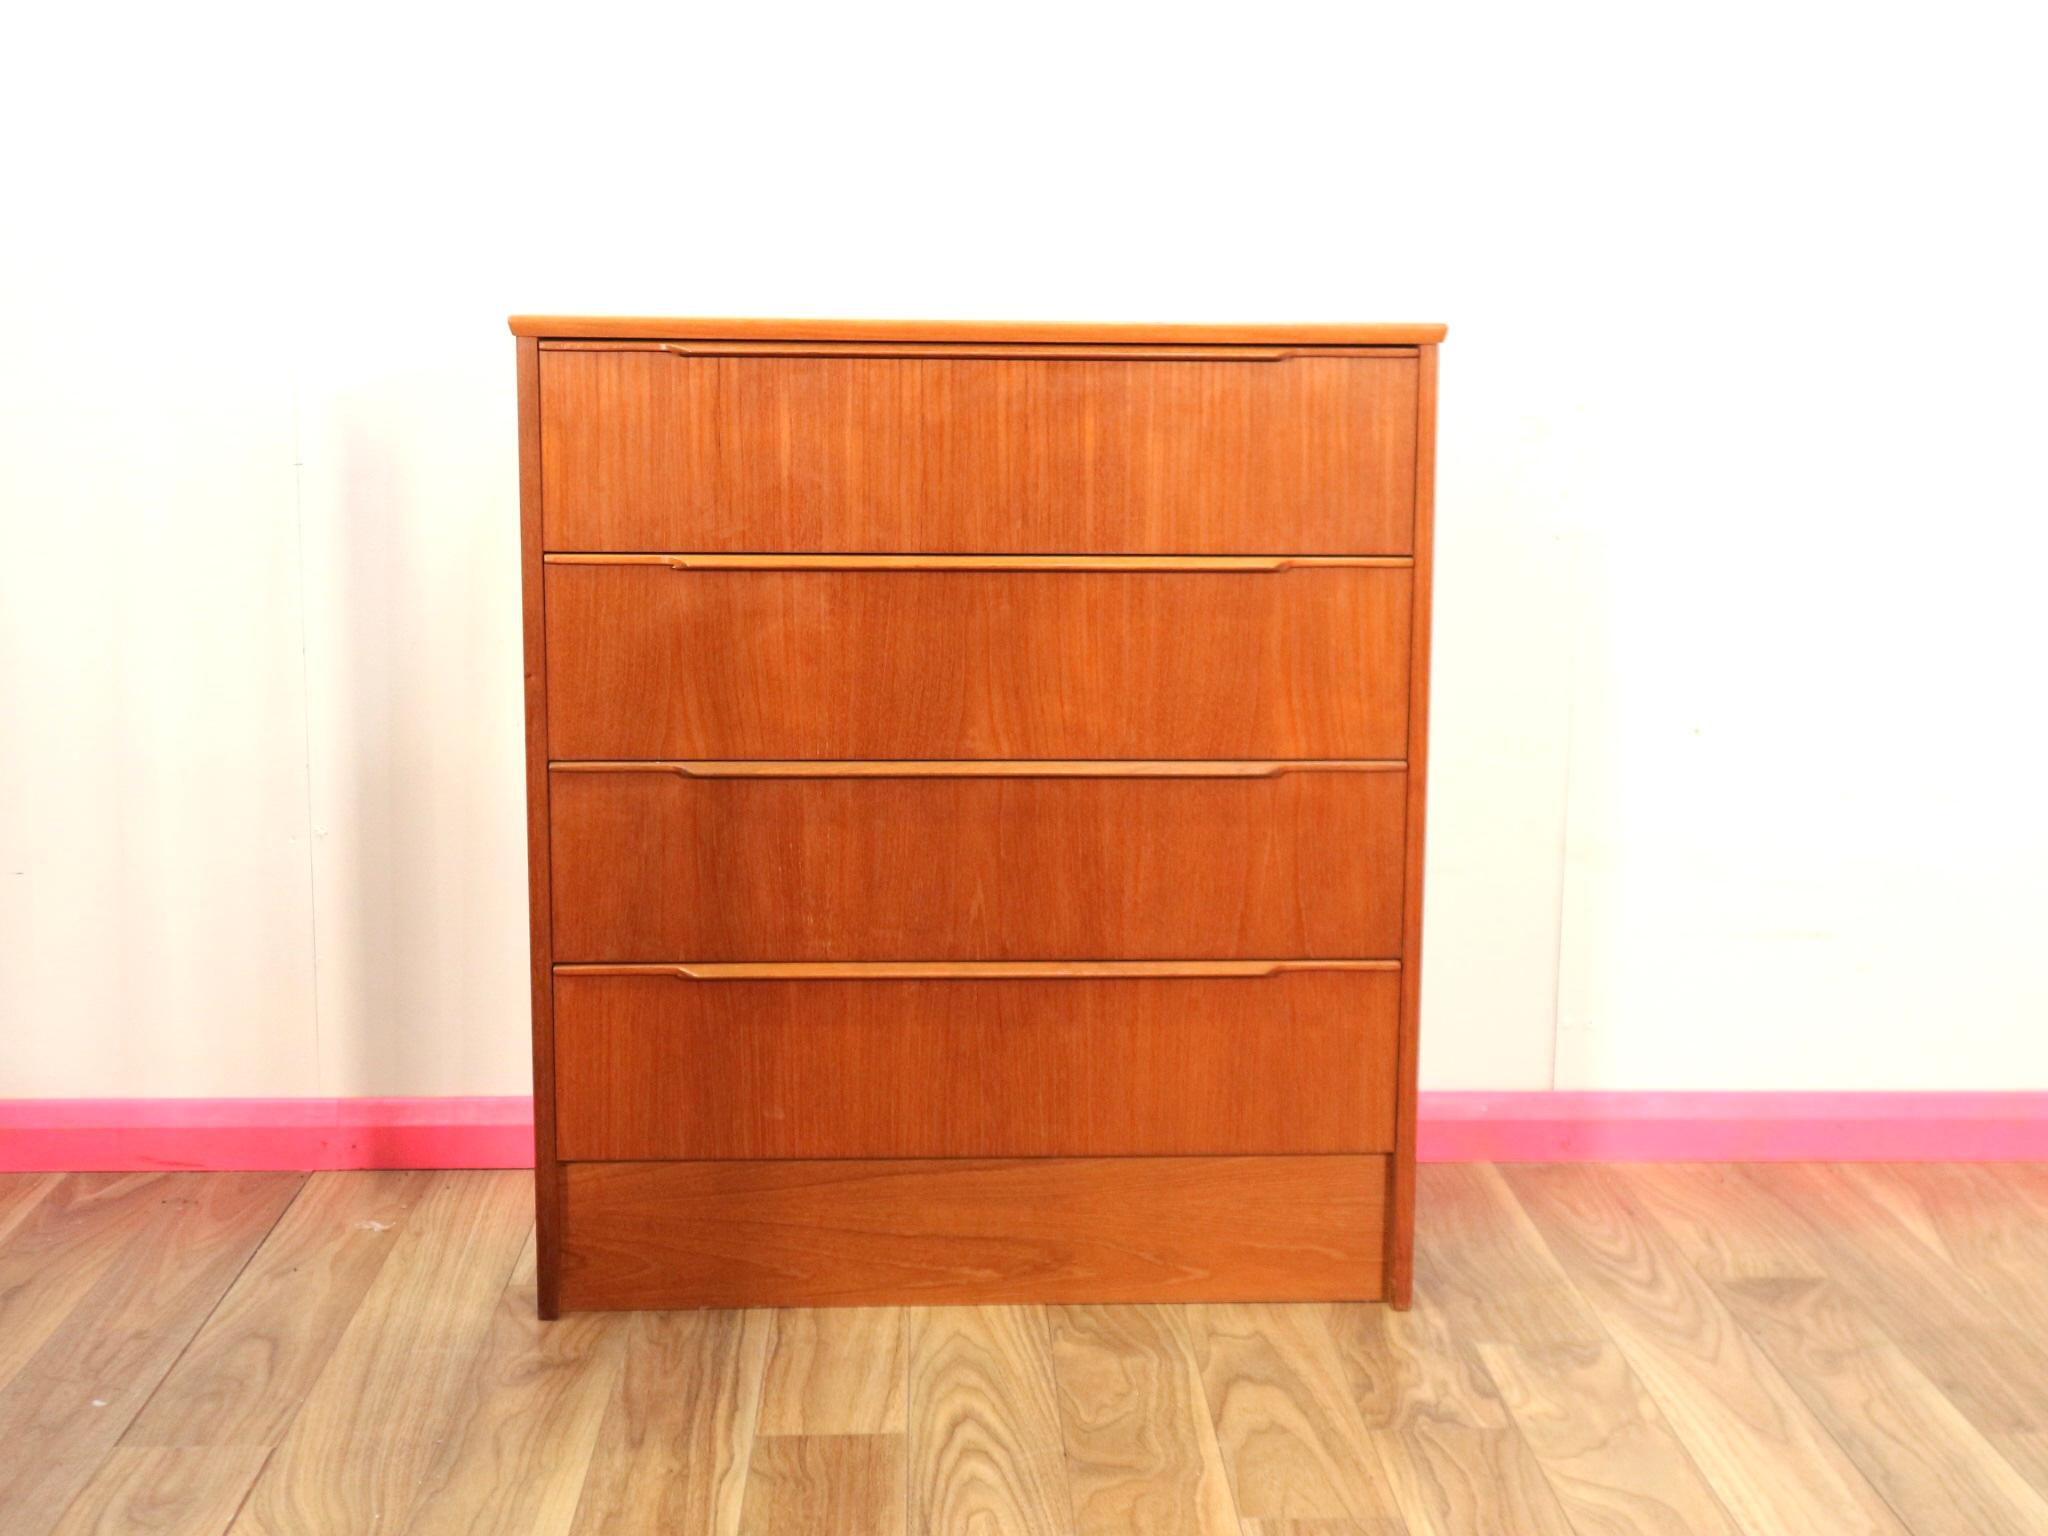 A gorgeous mid-century danish dresser manufactured by'Steens' of Denmark.

Featuring four good sized drawers, elegant handles and a stunning grain to the teak, a very desirable piece.

